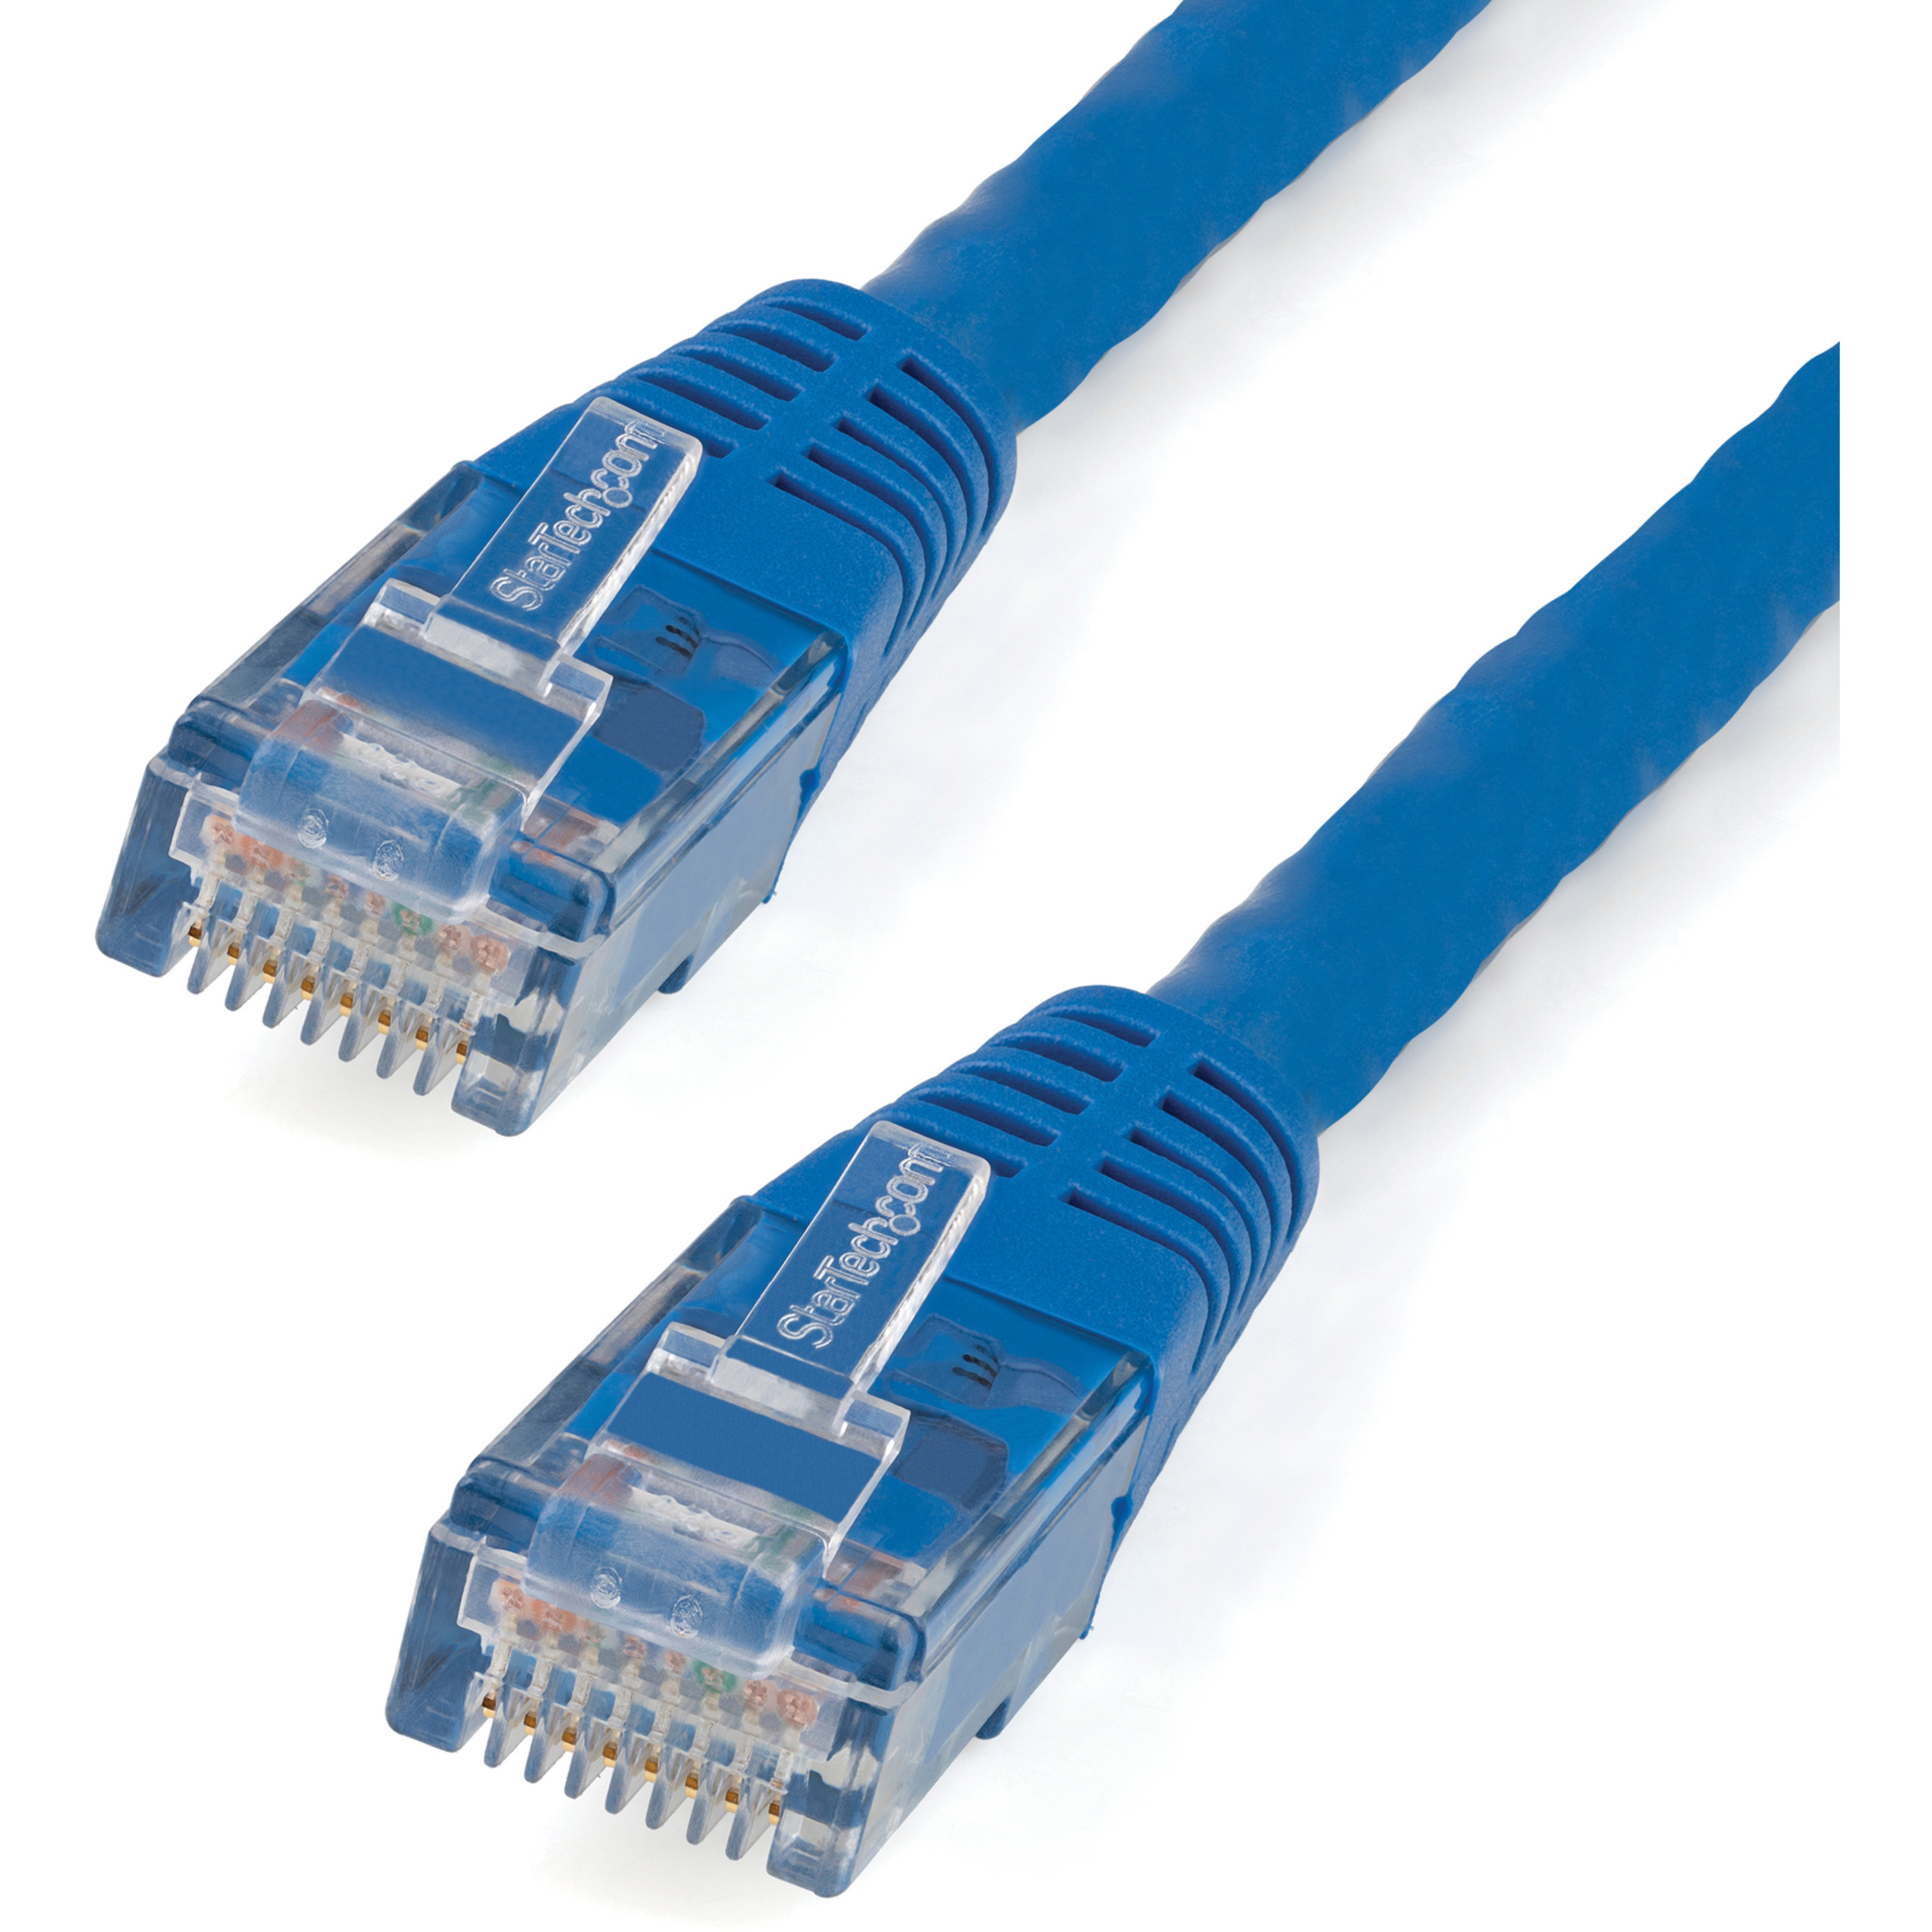 Startech .com 25ft CAT6 Ethernet CableBlue Molded Gigabit100W PoE UTP 650MHzCategory 6 Patch Cord UL Certified Wiring/TIA25ft Blu… C6PATCH25BL